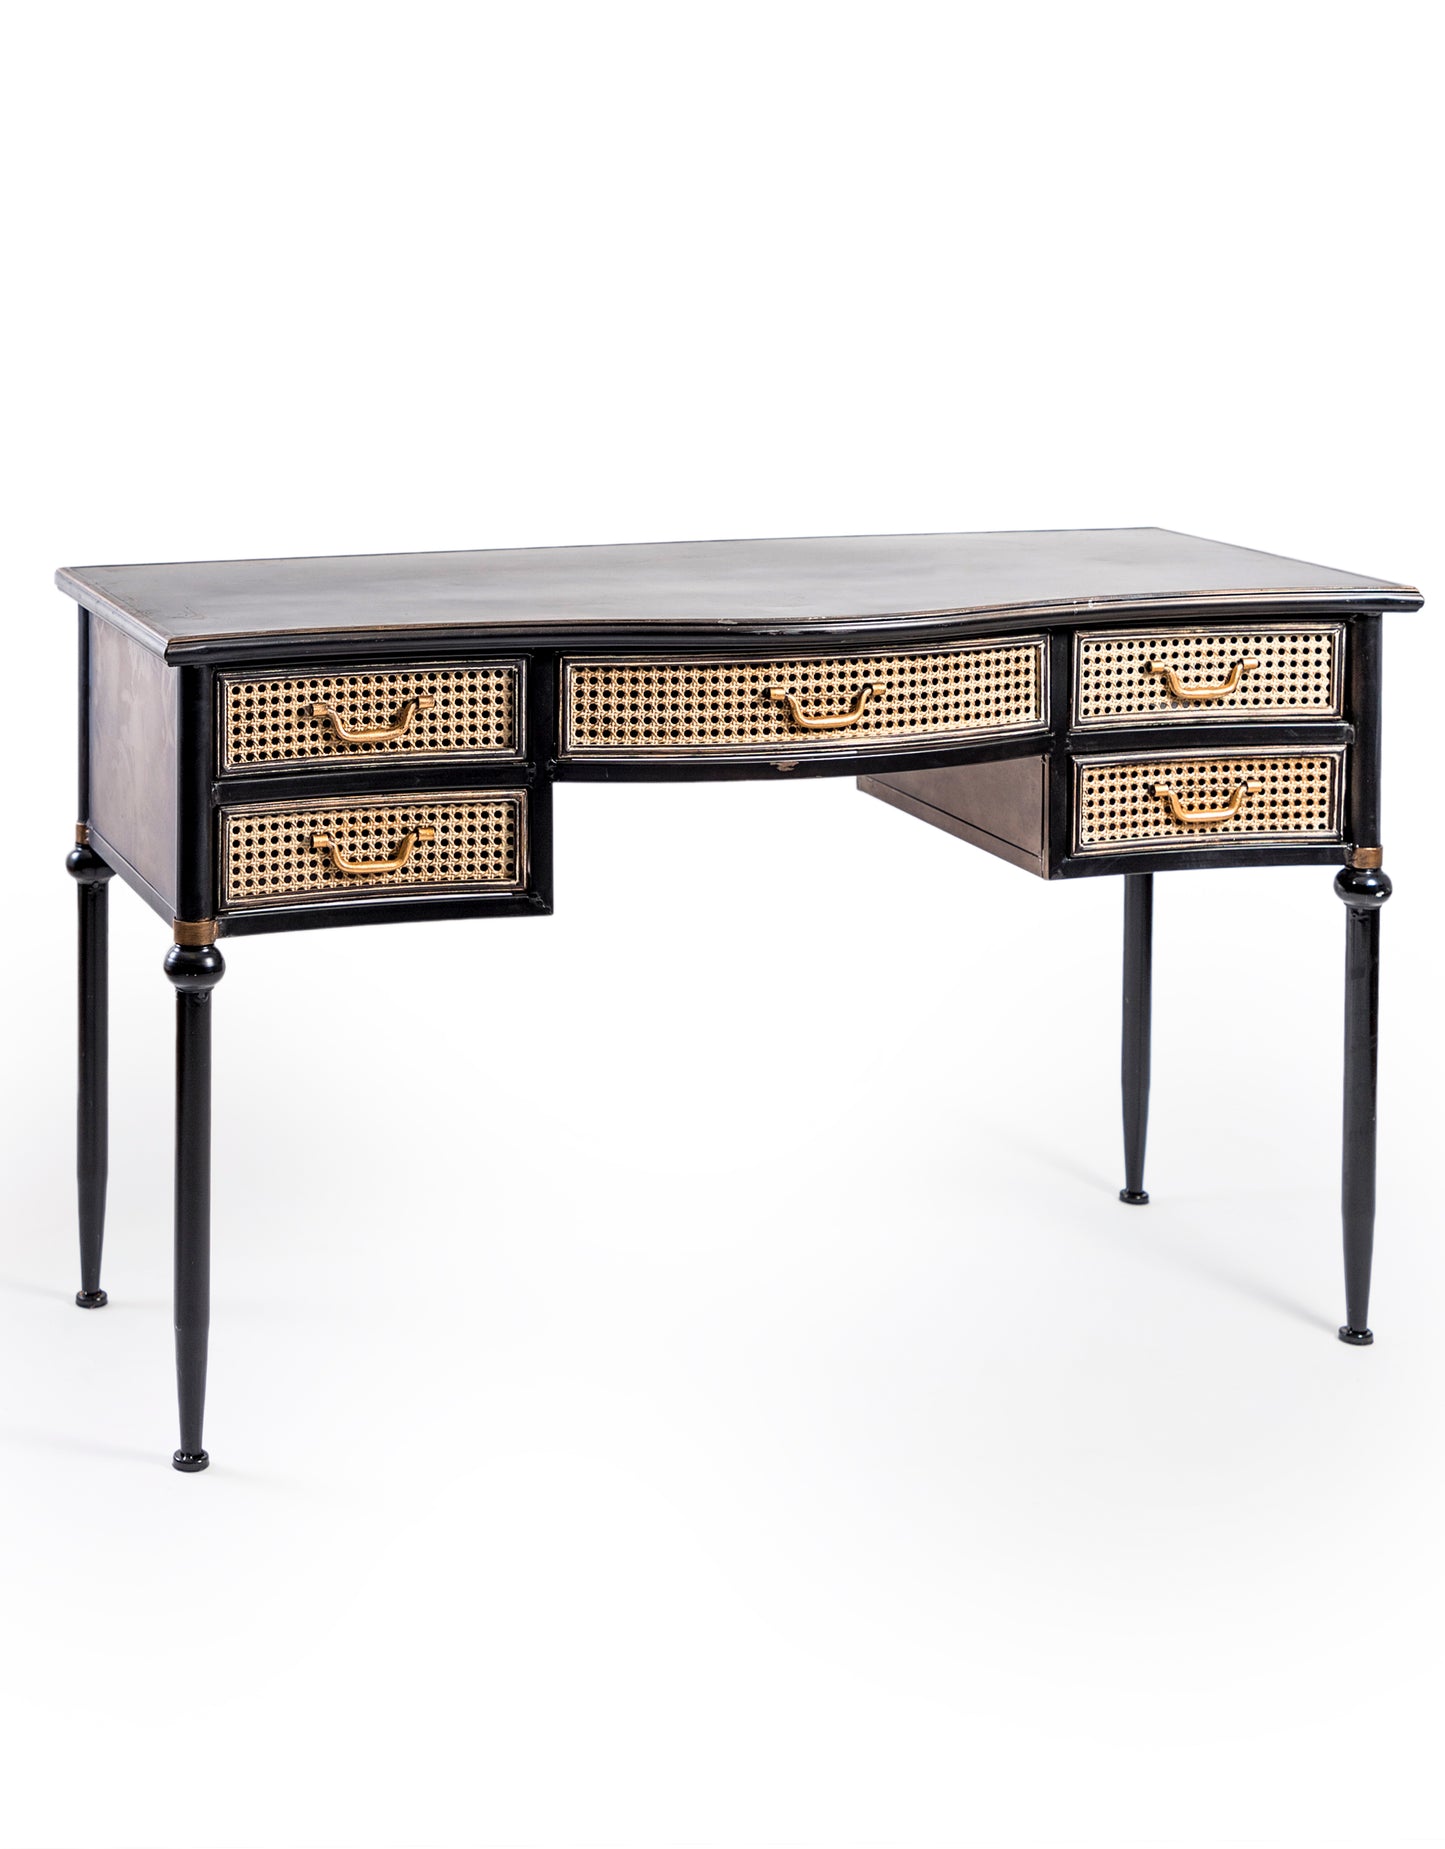 Antiqued Black Desk/Console with Metal Rattan Drawers